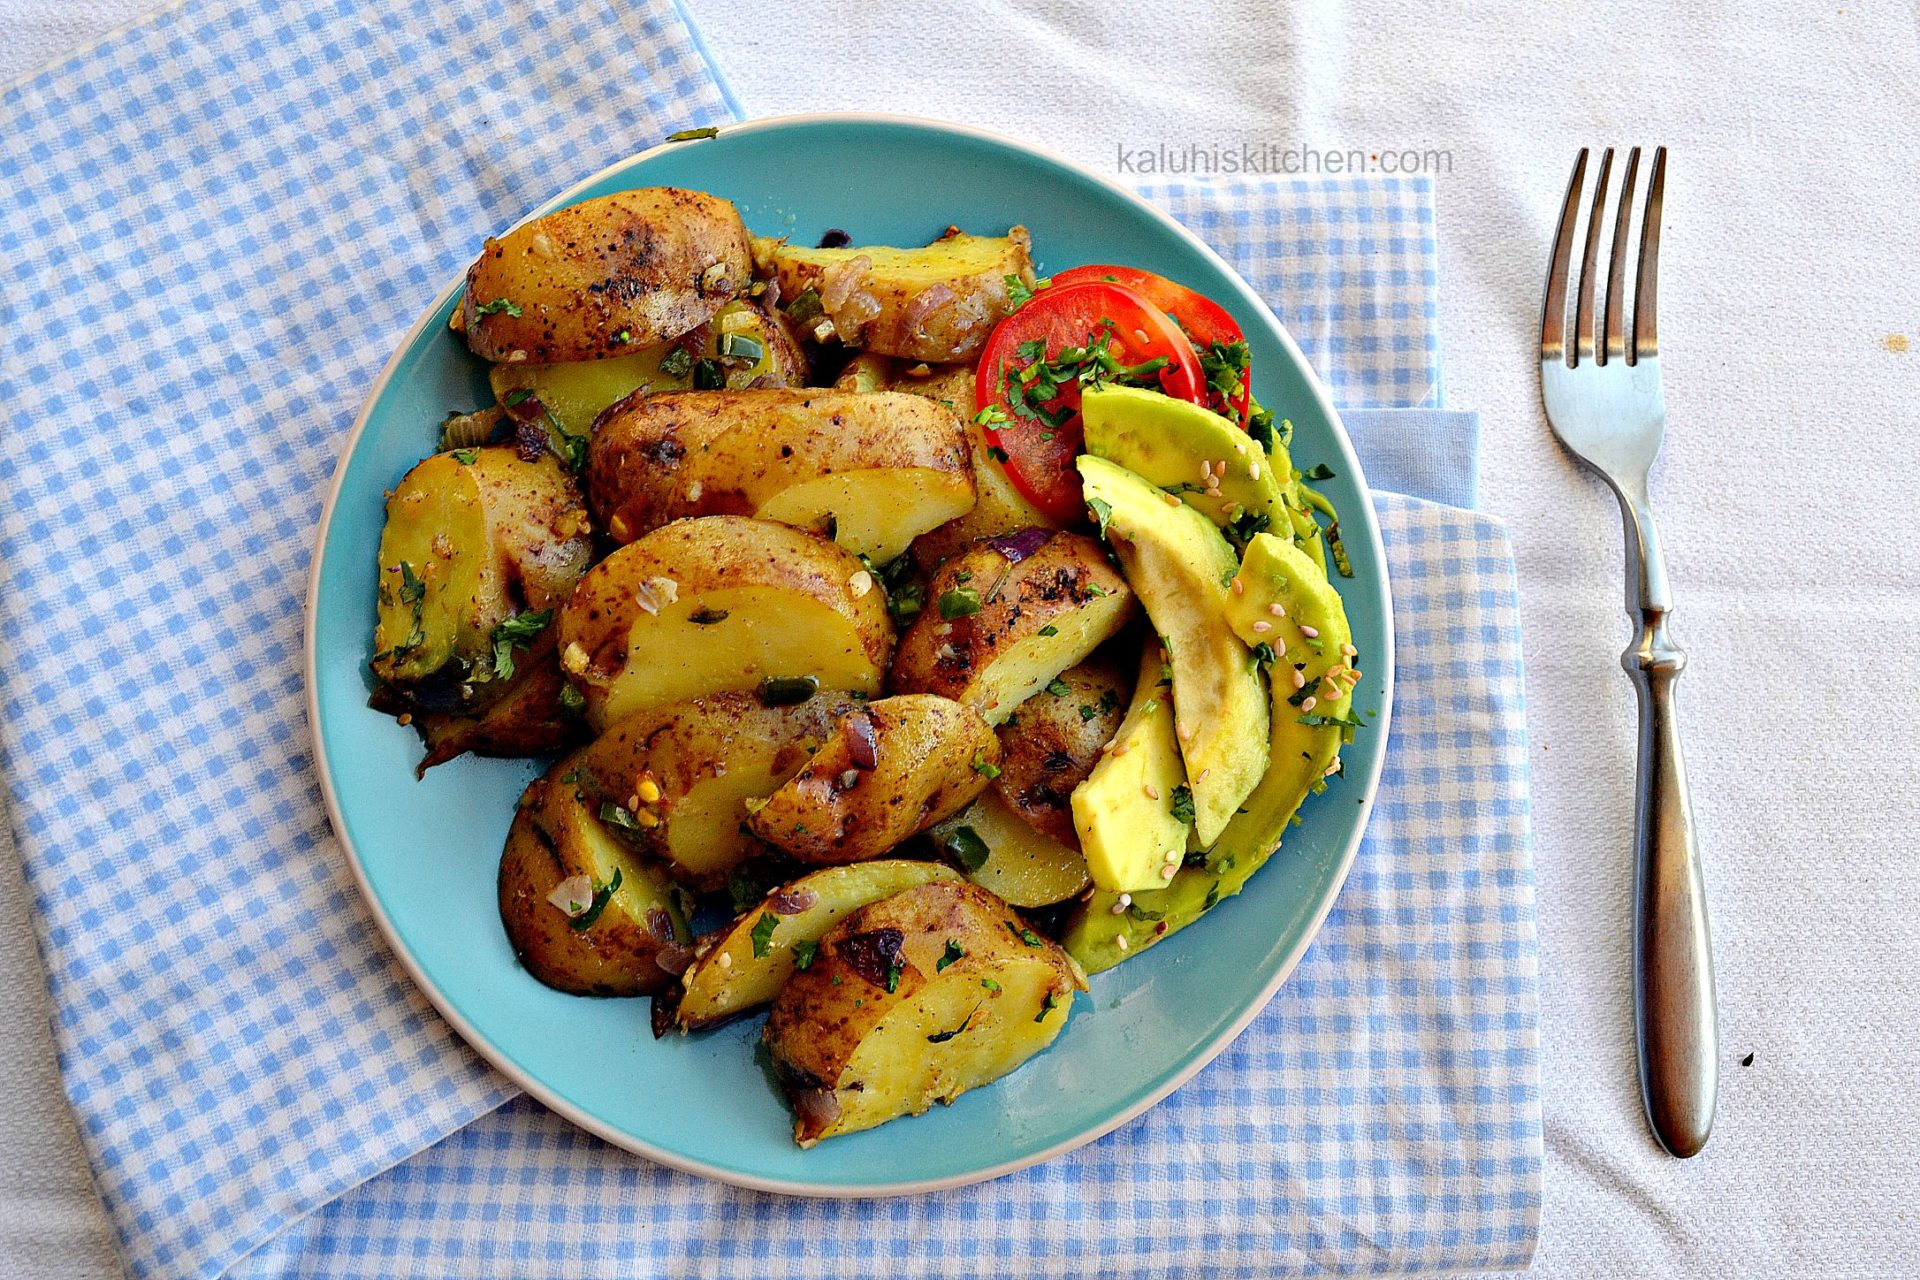 kenyan food_best breakfast recipes for energy through out the day_potato and pepper breakfast sautee_kaluhiskitchen.com